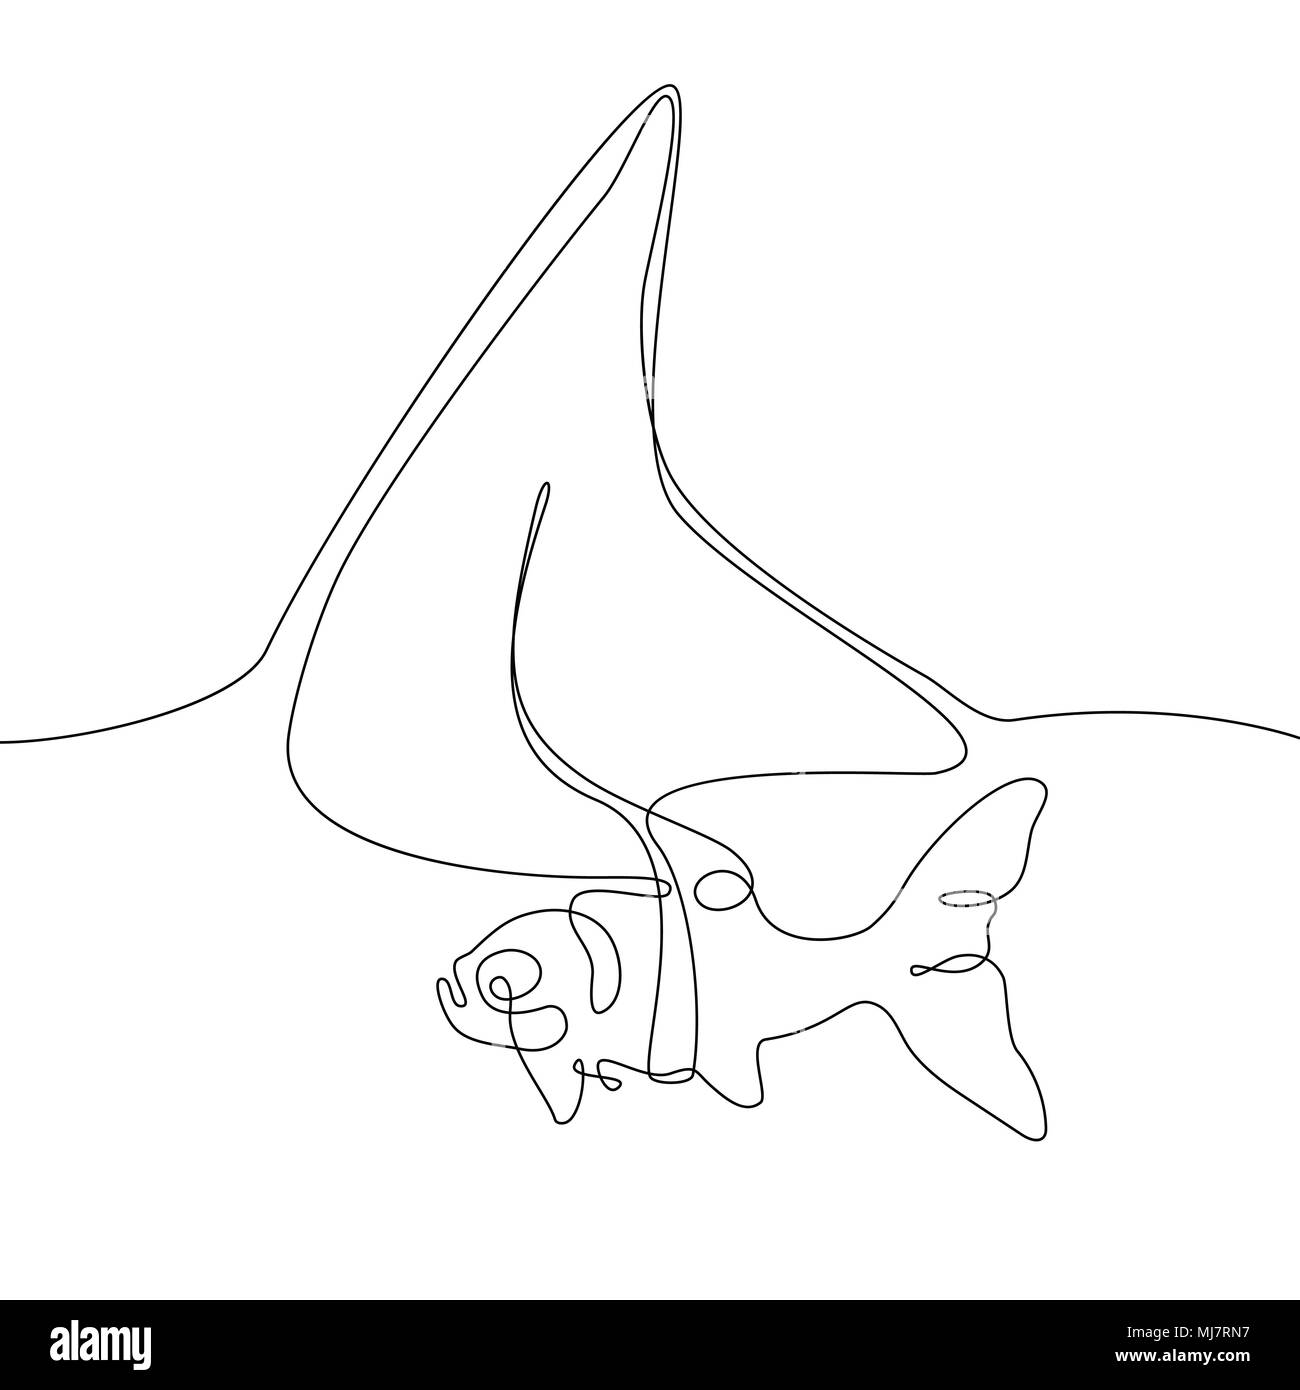 Fish with a shark fin - one line design style illustration Stock Vector